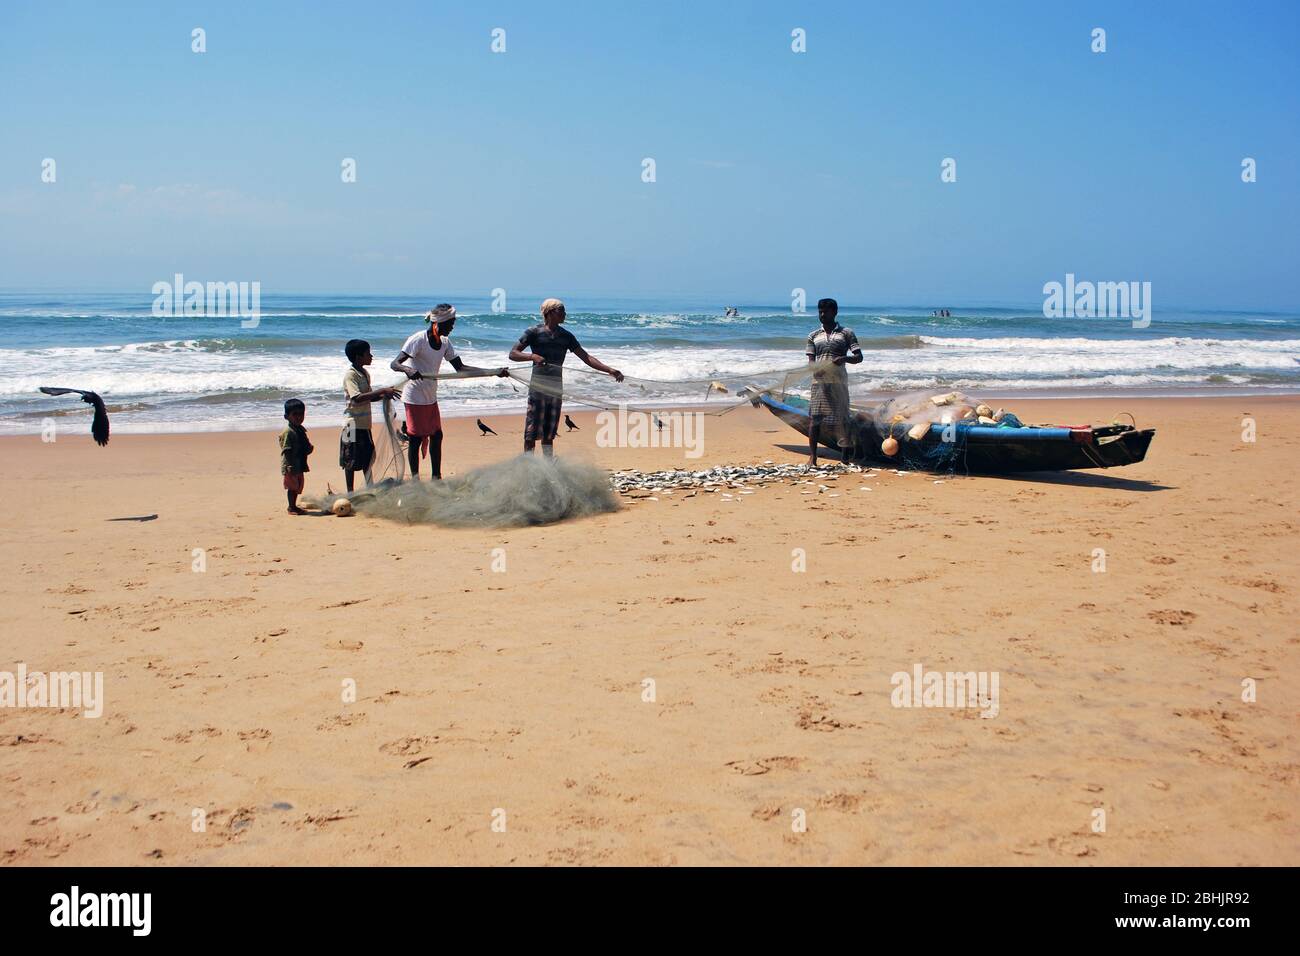 Fishermens working with a fishing net on the sea beach of Puri. Stock Photo